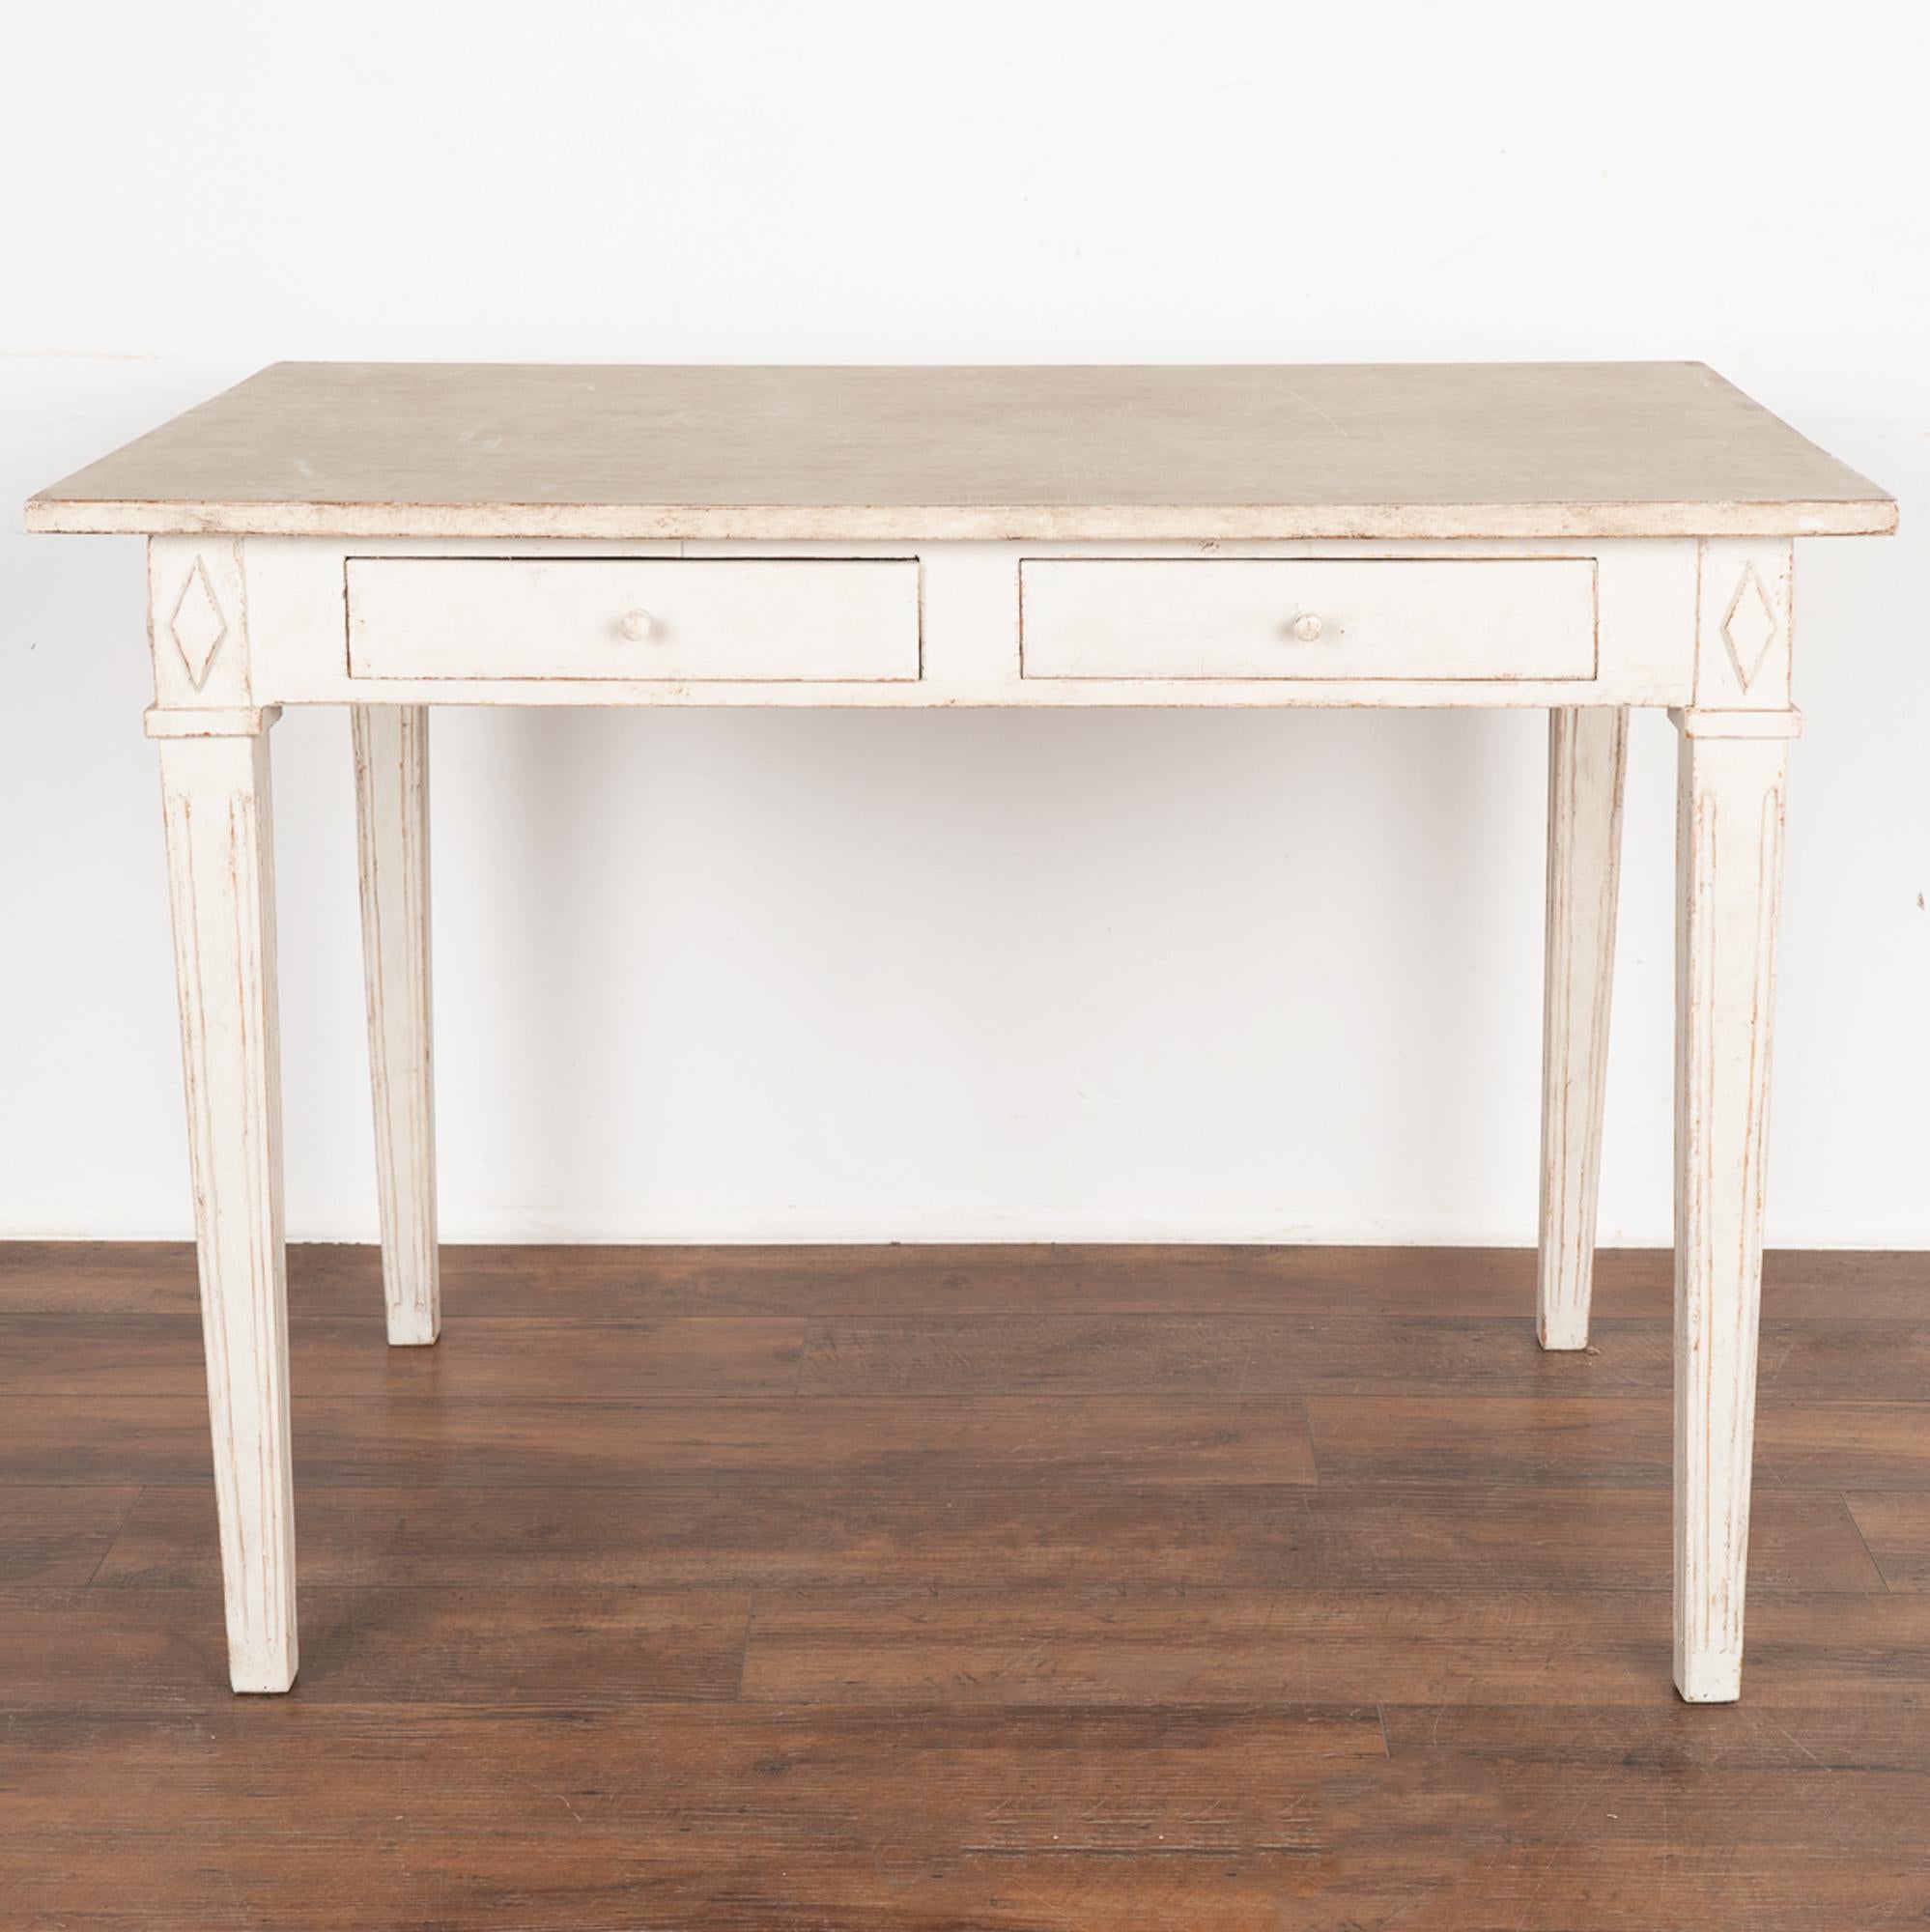 19th Century Gustavian White Painted Partner's Desk Writing Table, Sweden circa 1820-40 For Sale